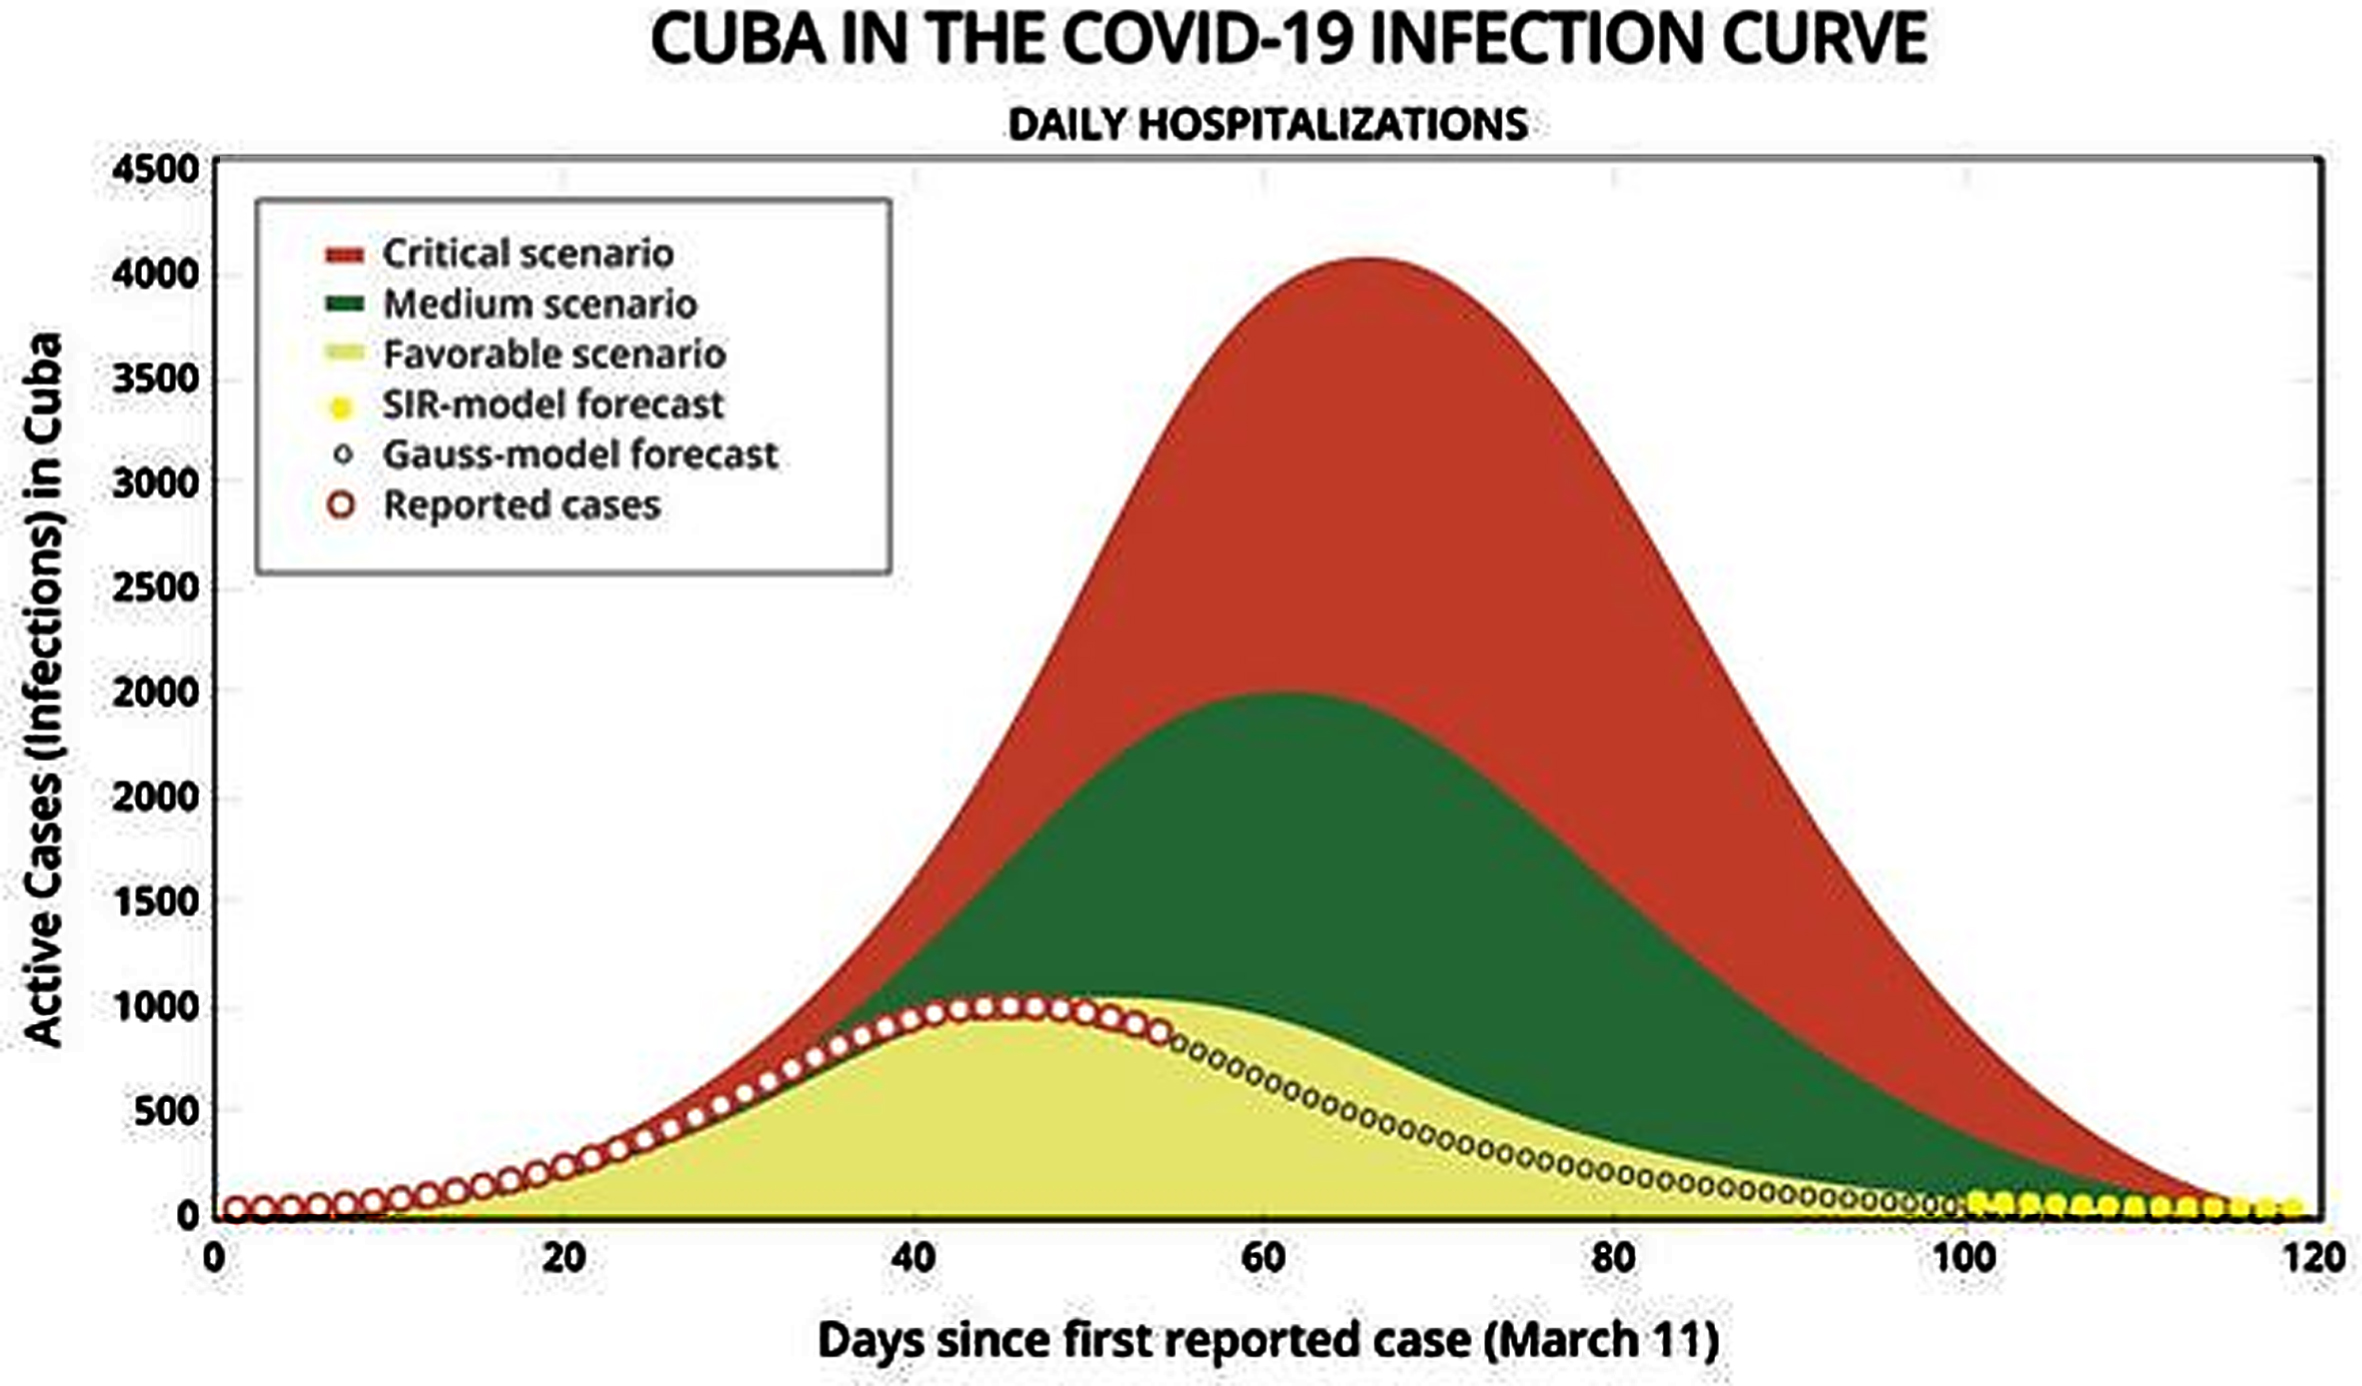 Predictive mathematical models of the behavior of the pandemic in Cuba. Source: Cubadebate Official Site [28].